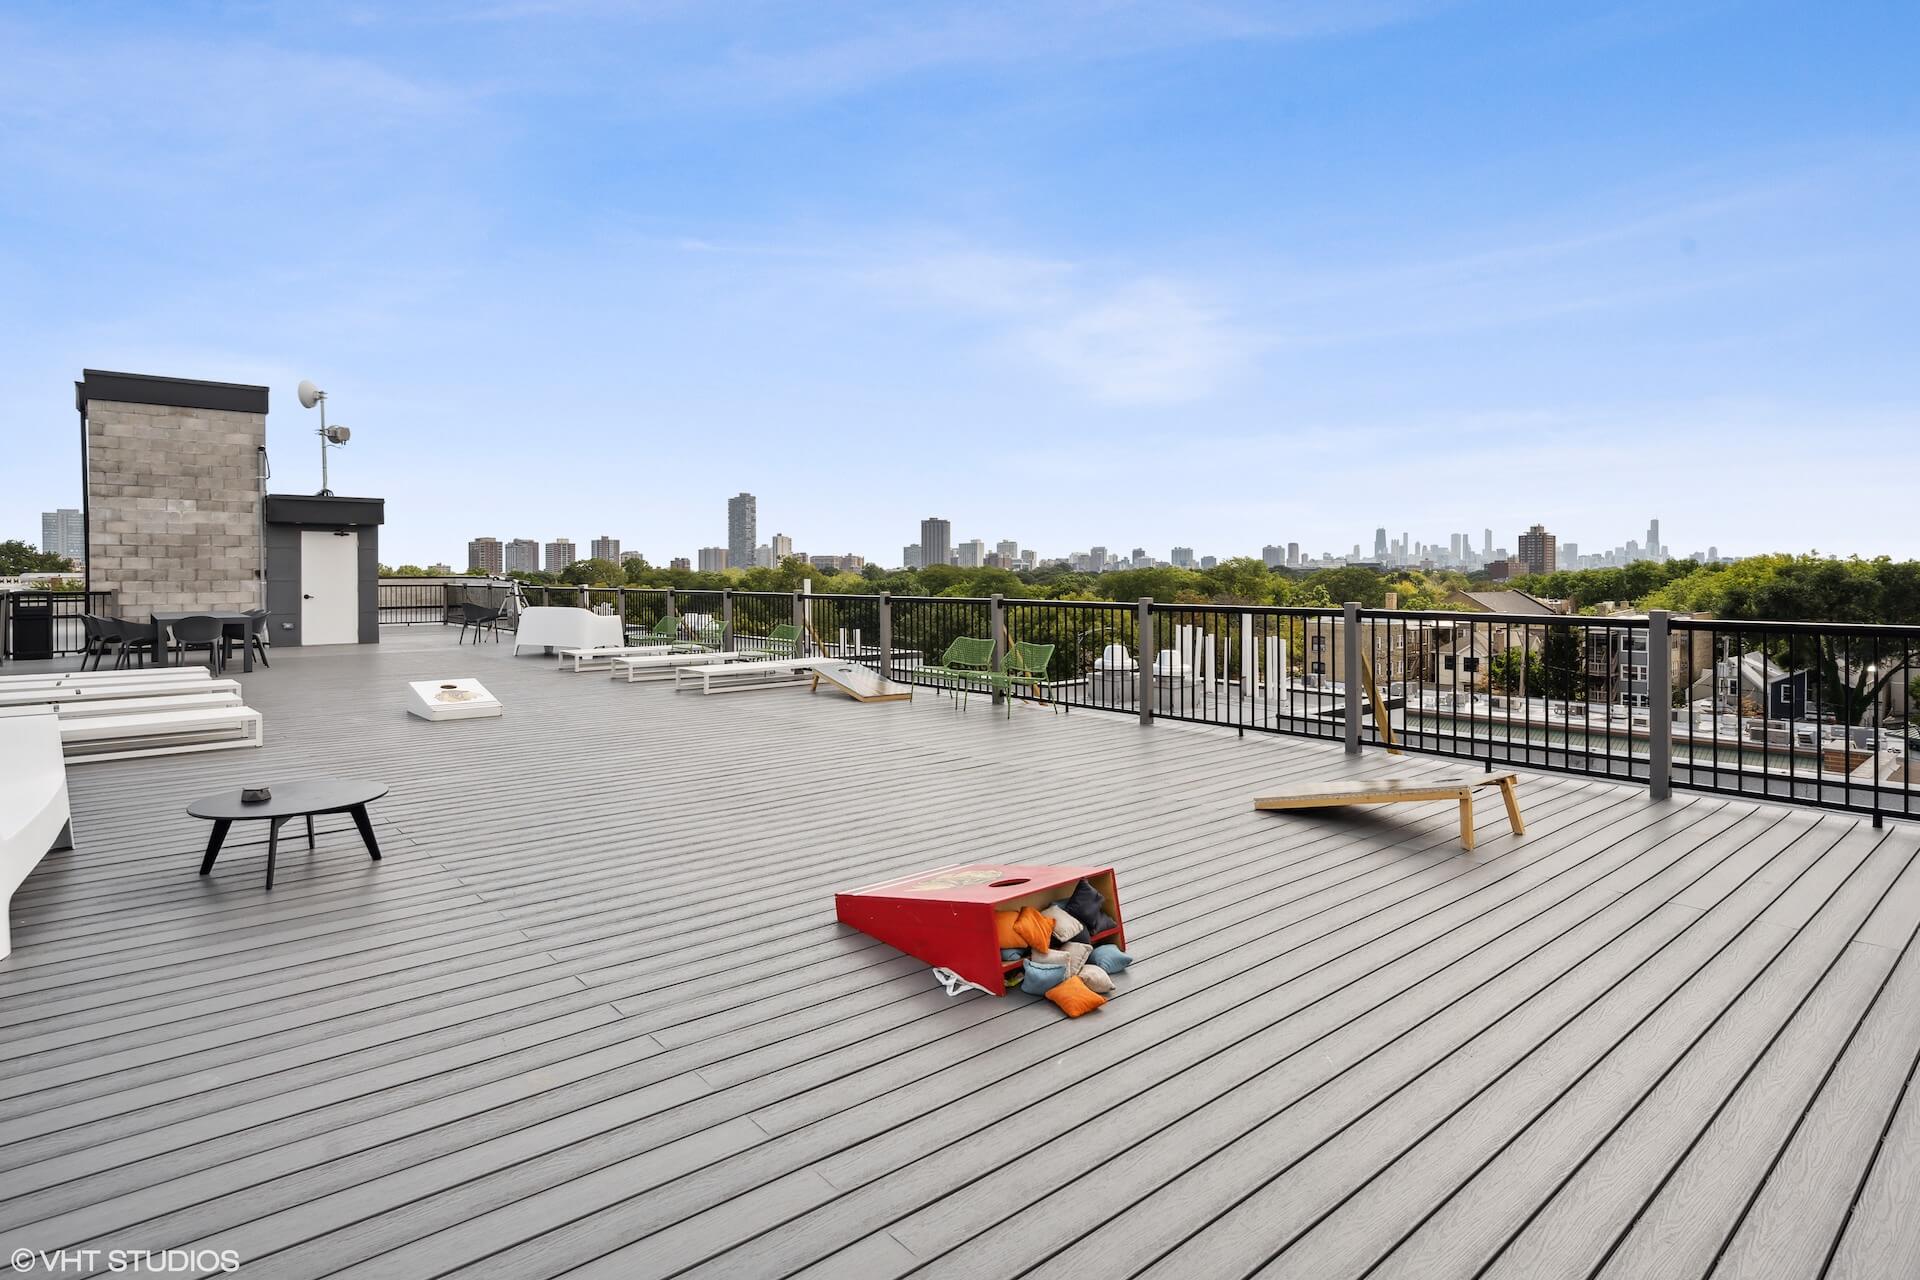 Private rooftop deck with lounge seating and corn hole games.